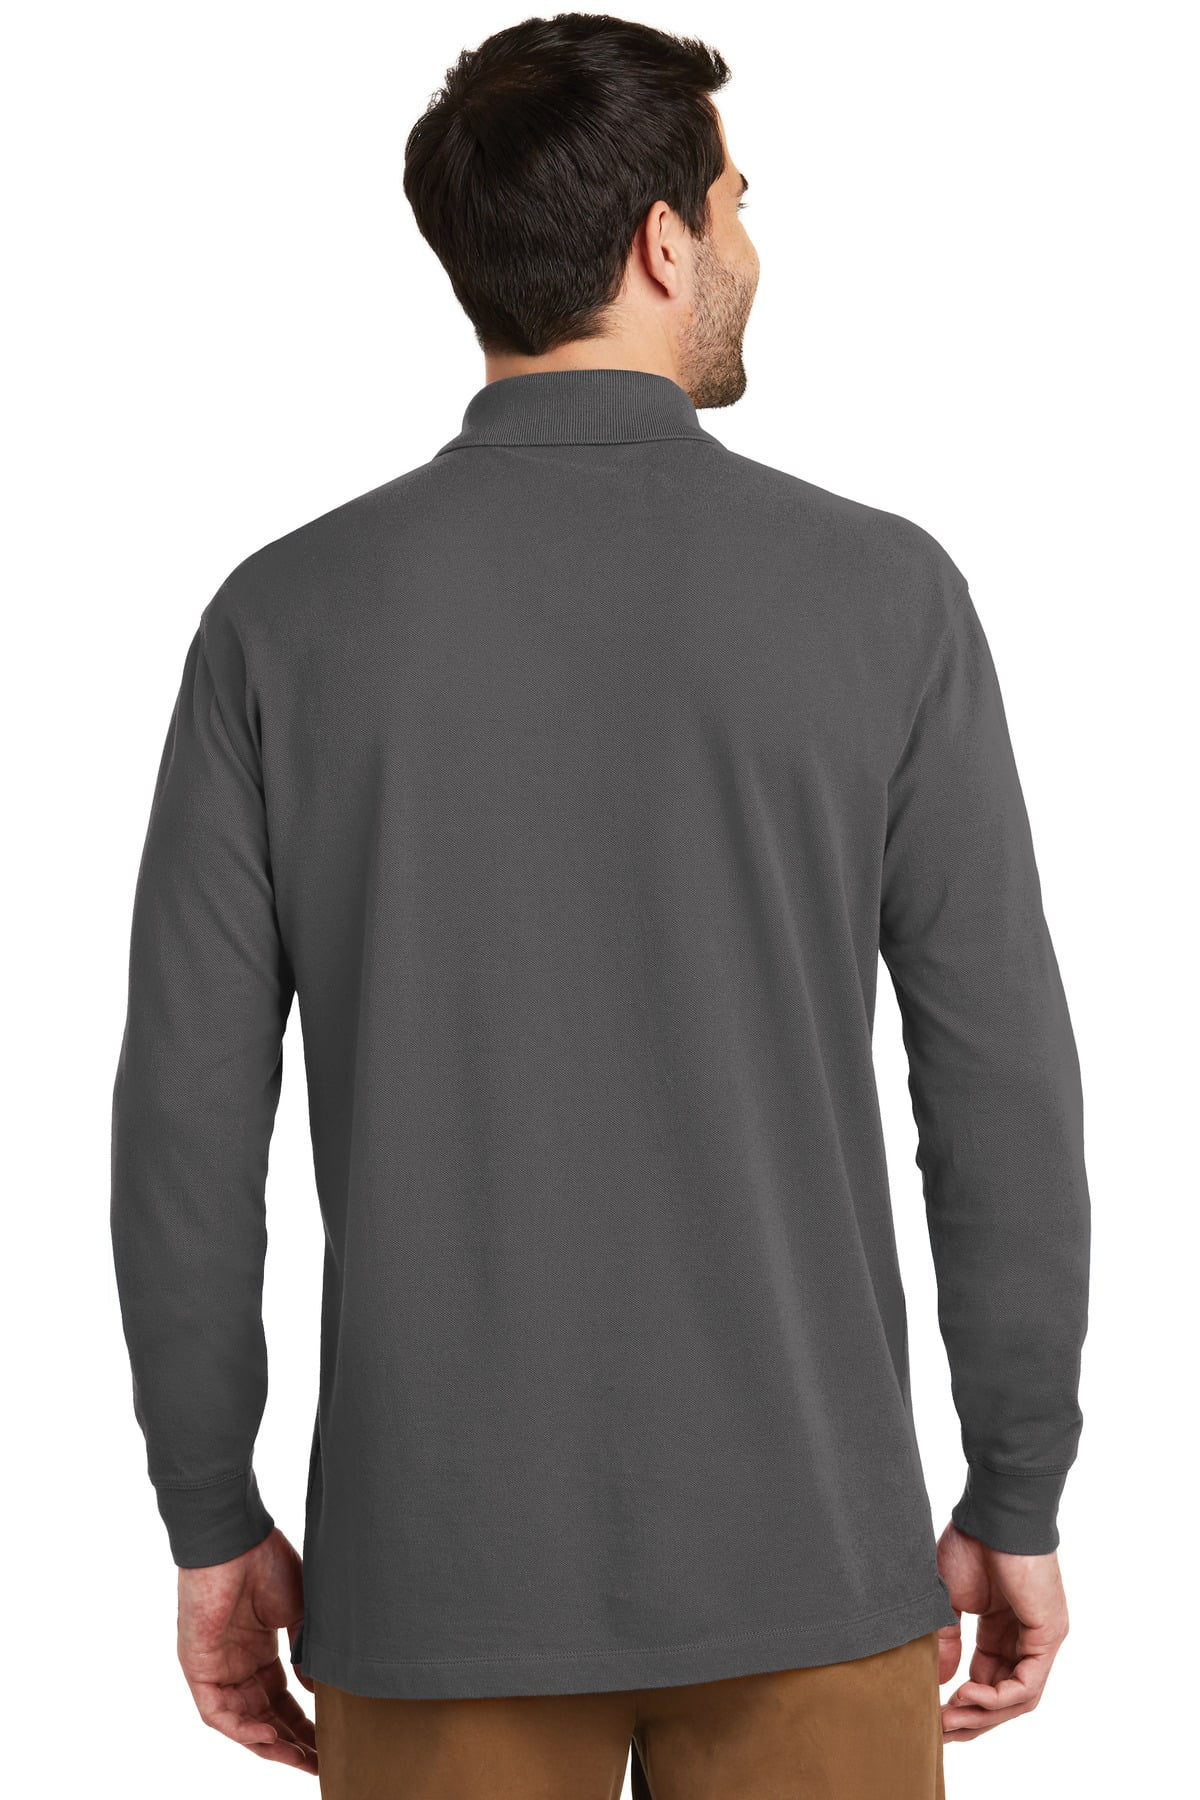 Port Authority 1191451 EZCotton Long Sleeve Polo in Sterling Grey for  K8000LS - 2XL